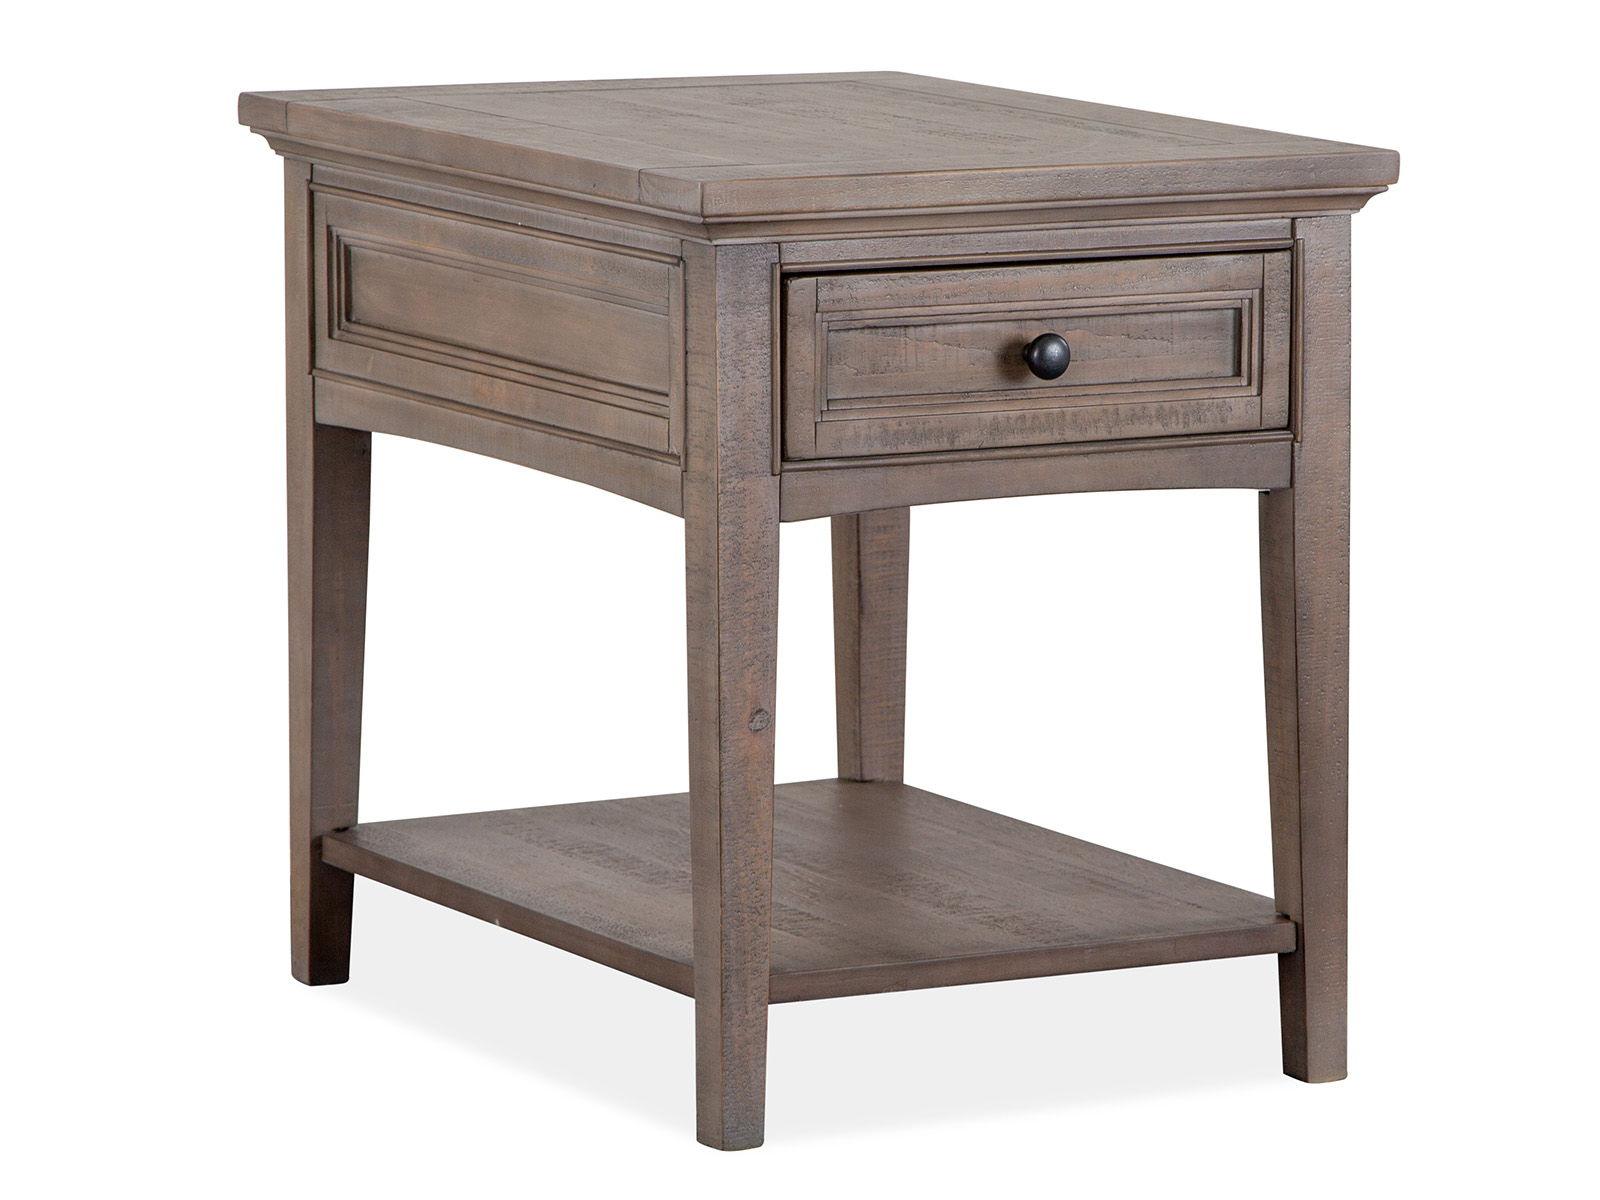 Magnussen Furniture - Paxton Place - Rectangular End Table - Dovetail Grey - 5th Avenue Furniture